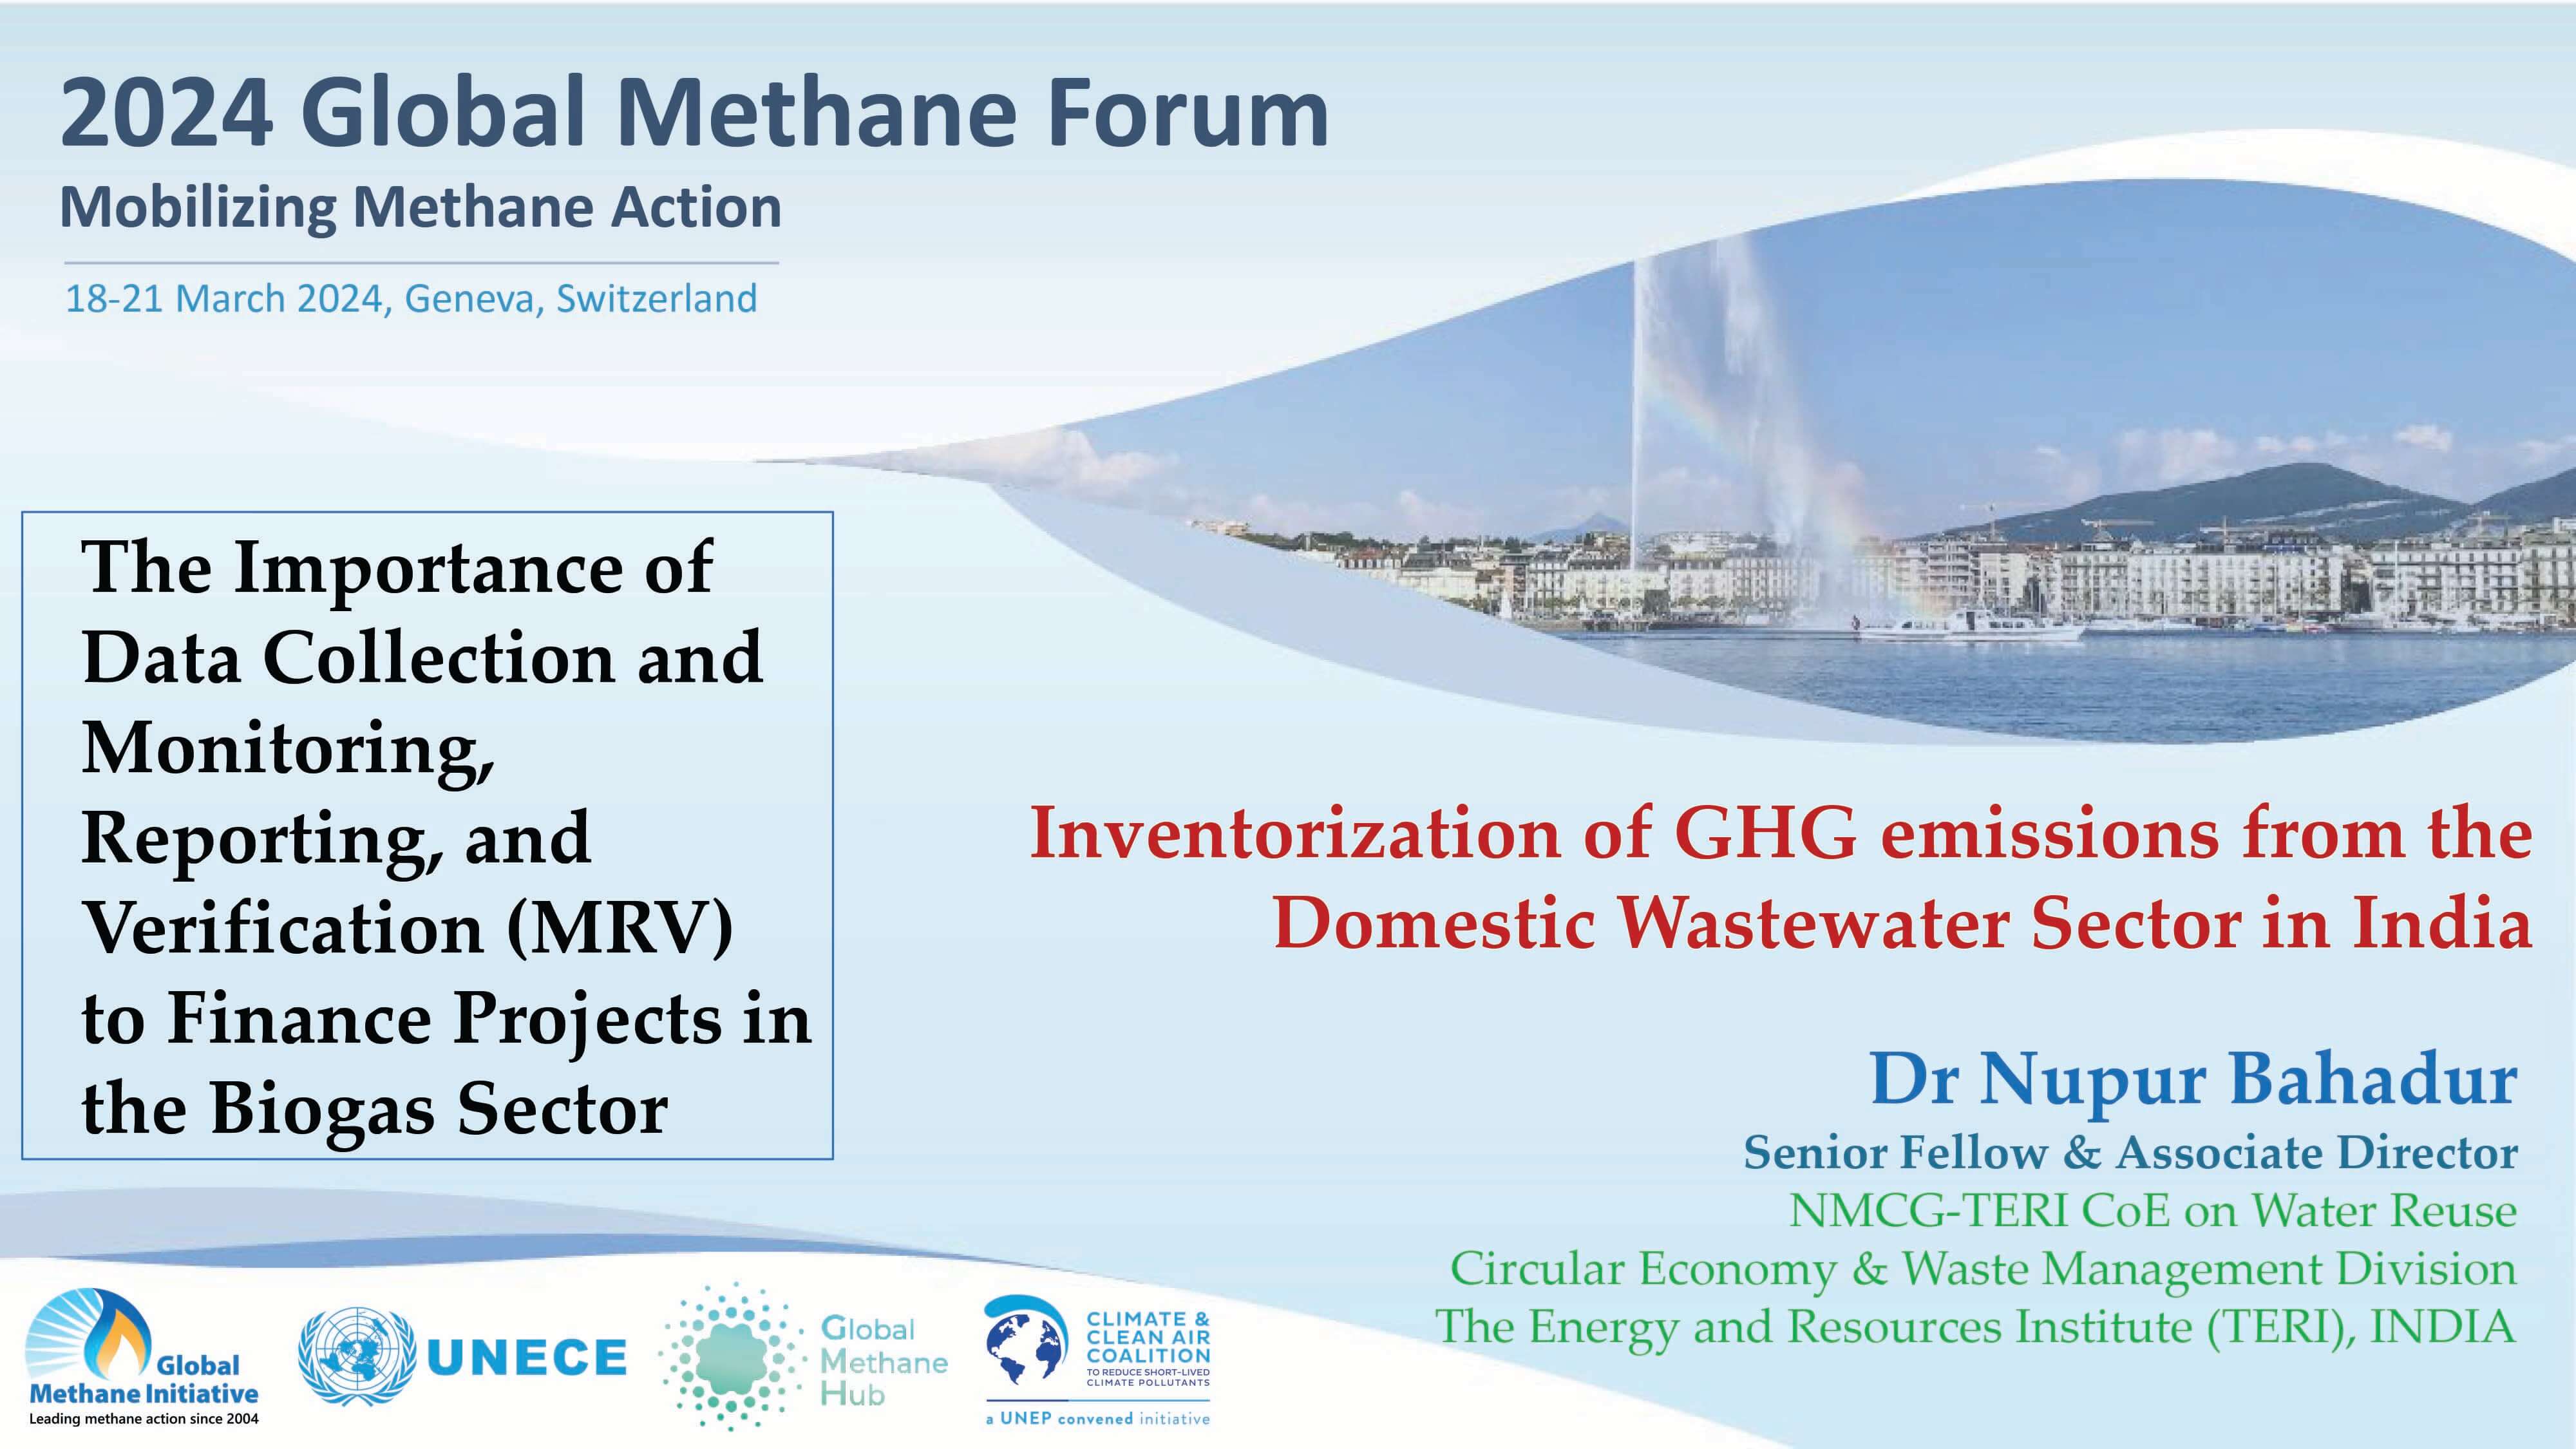 Inventorization of GHG emissions from the Domestic Wastewater Sector in India